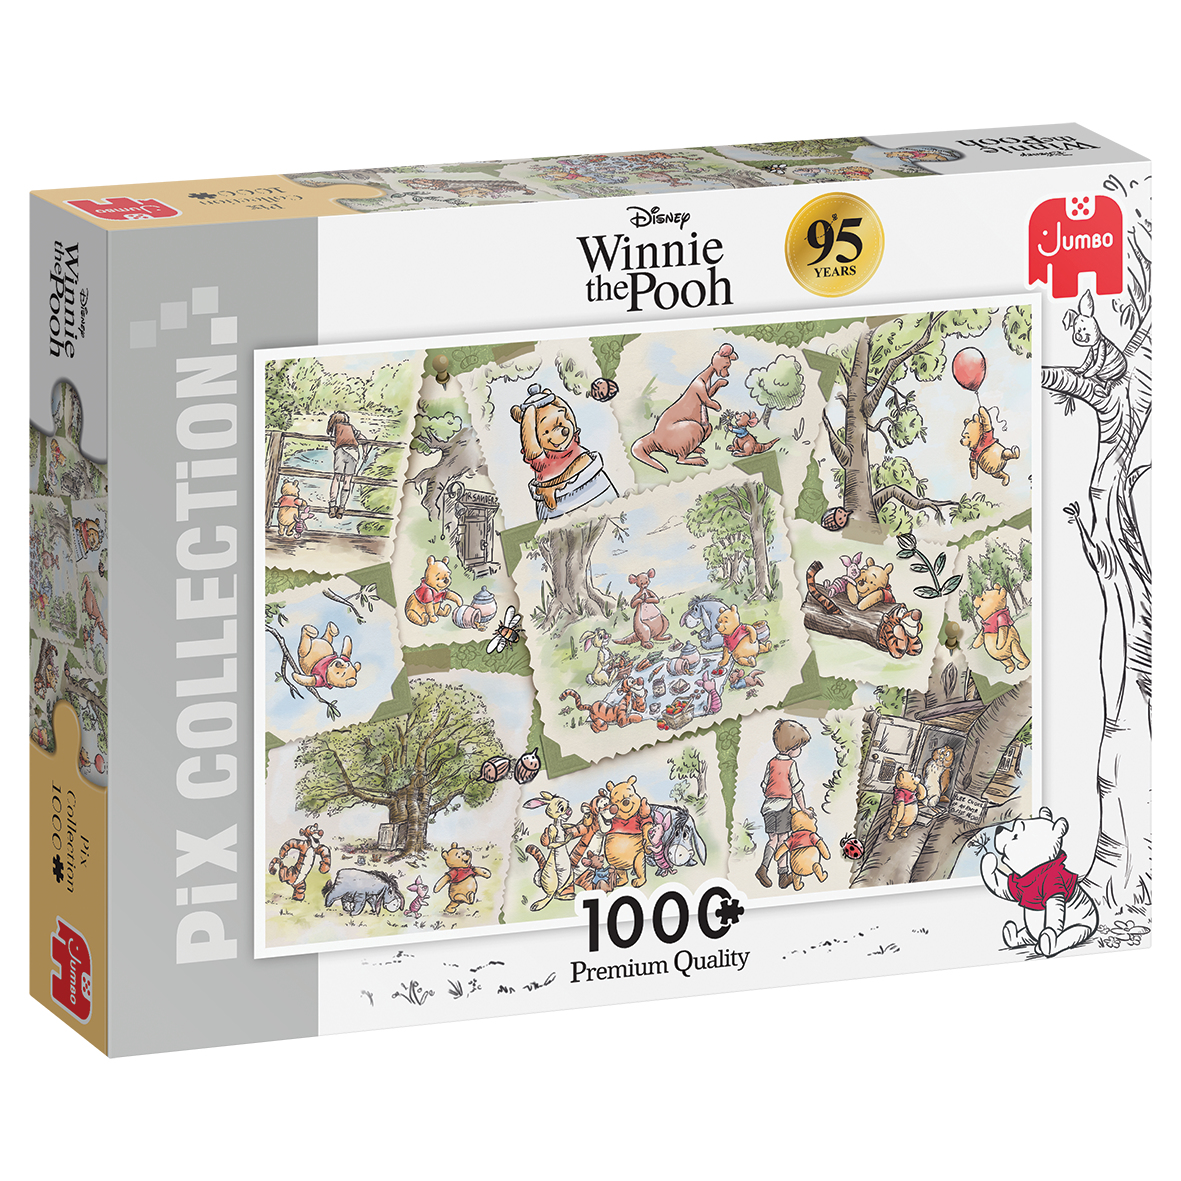 Pooh Teile Classic 1000 Mehrfarbig Anniversary - the Winnie Puzzle JUMBO Collection Disney 95th